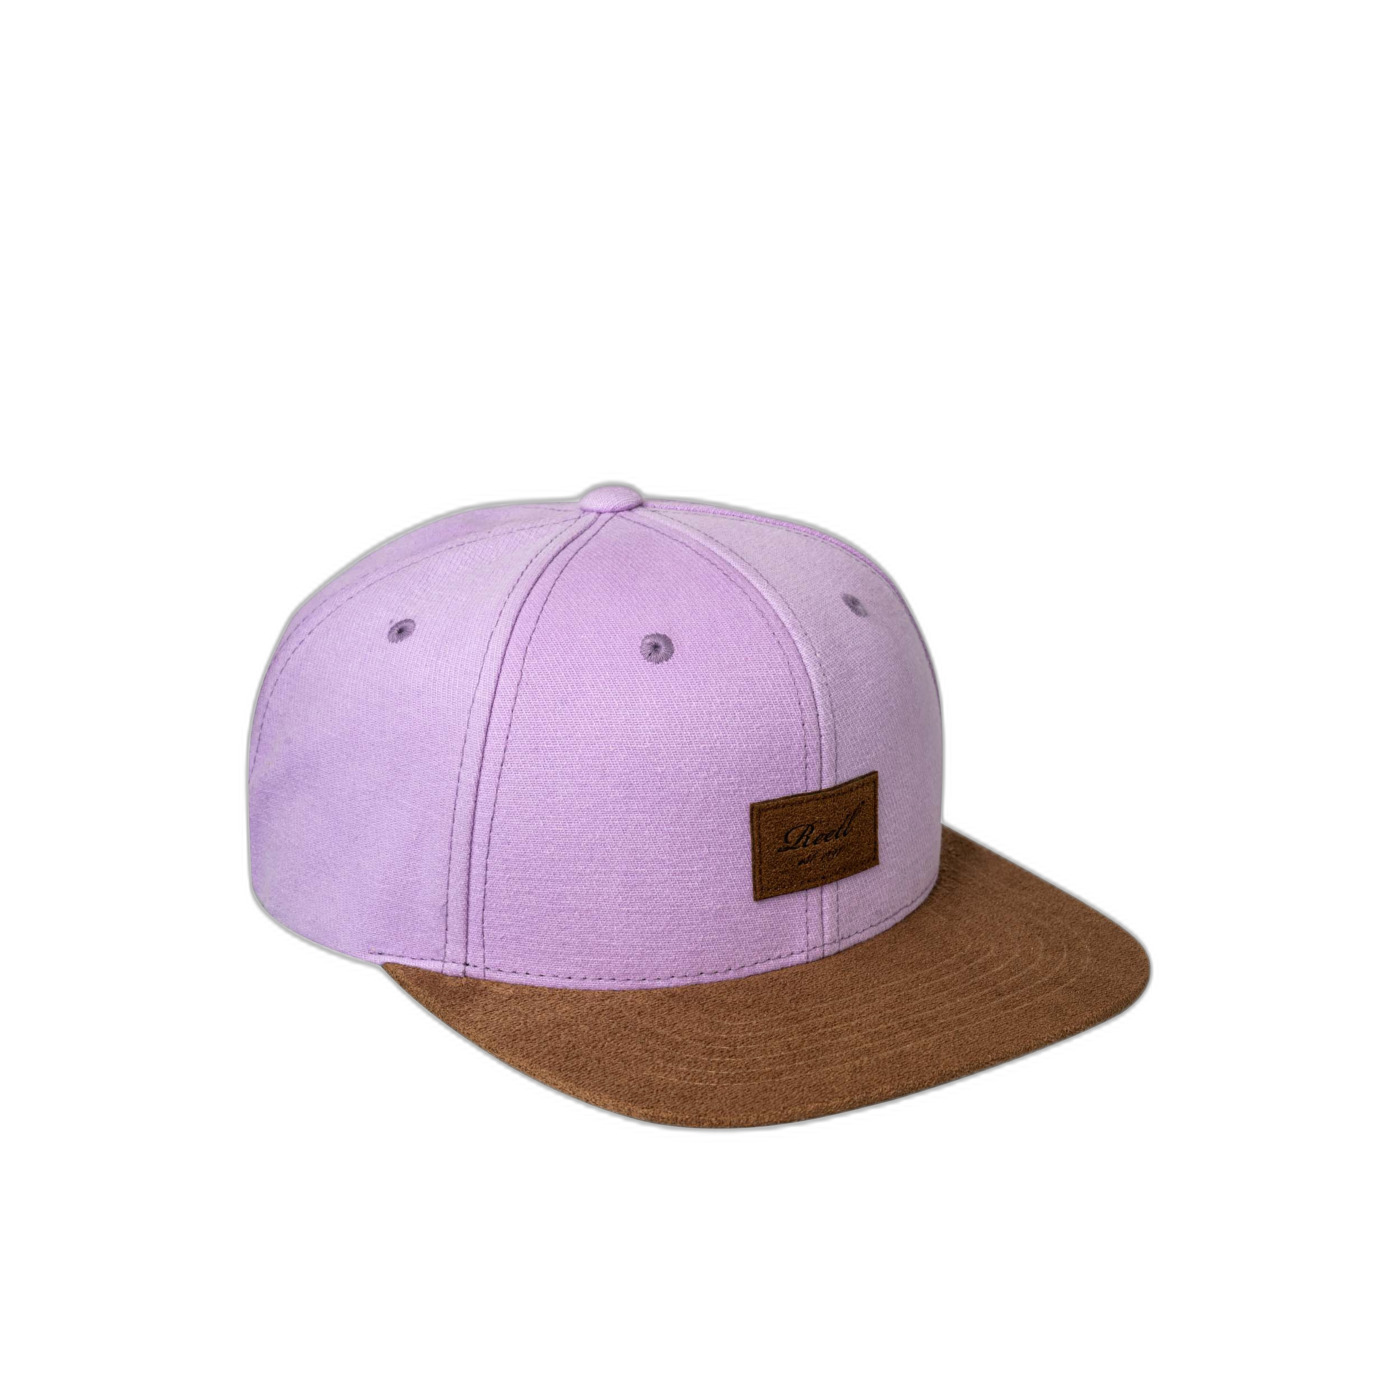 casquette reell suede